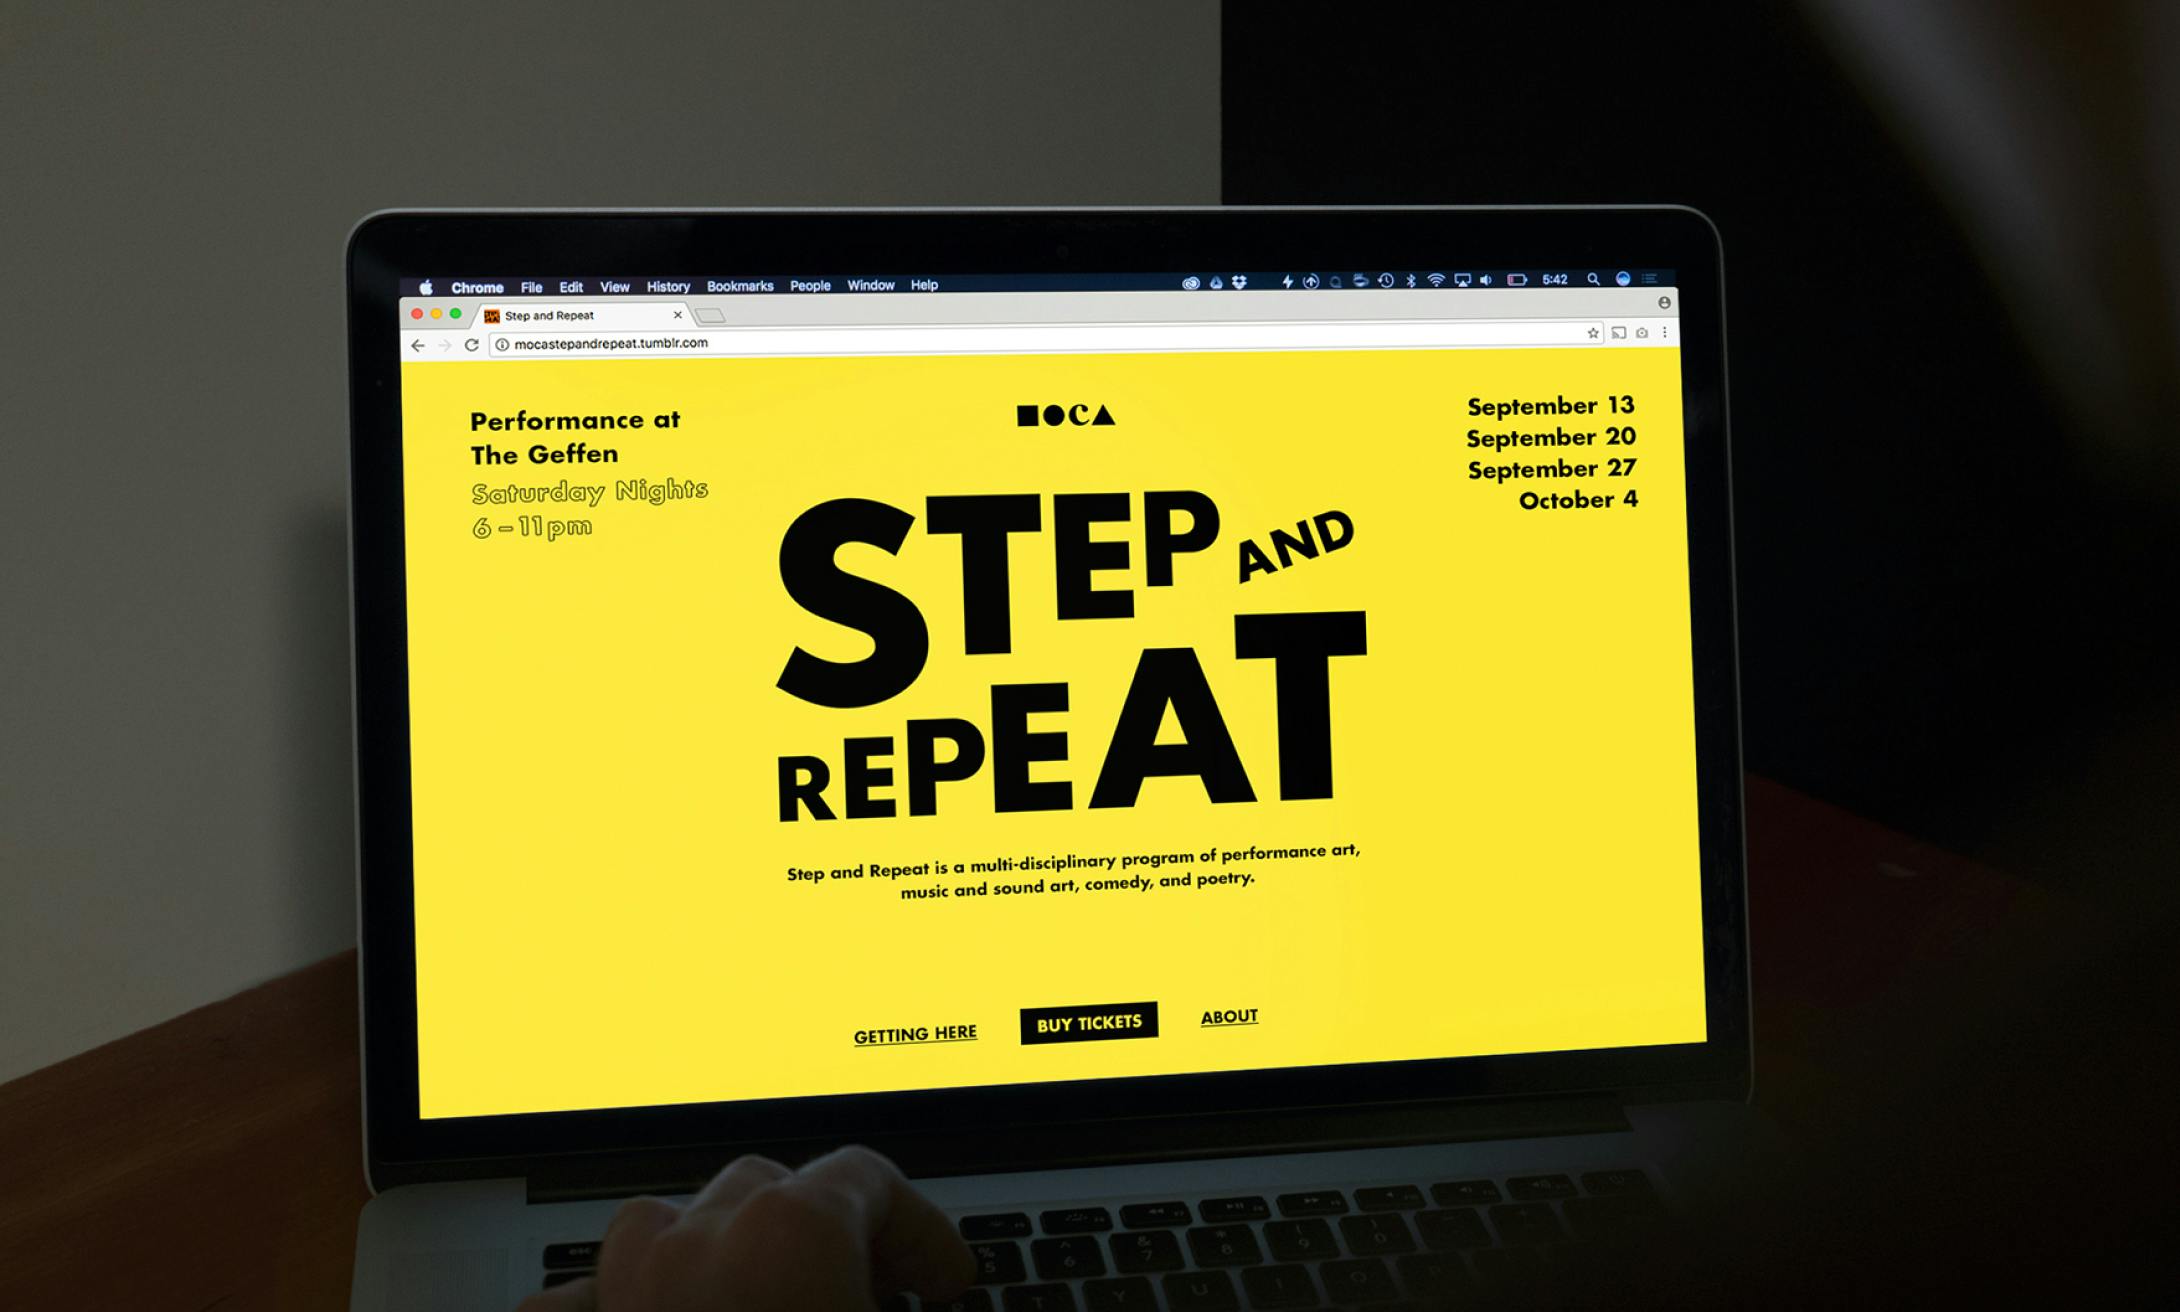 An online flyer for the Step and Repeat program